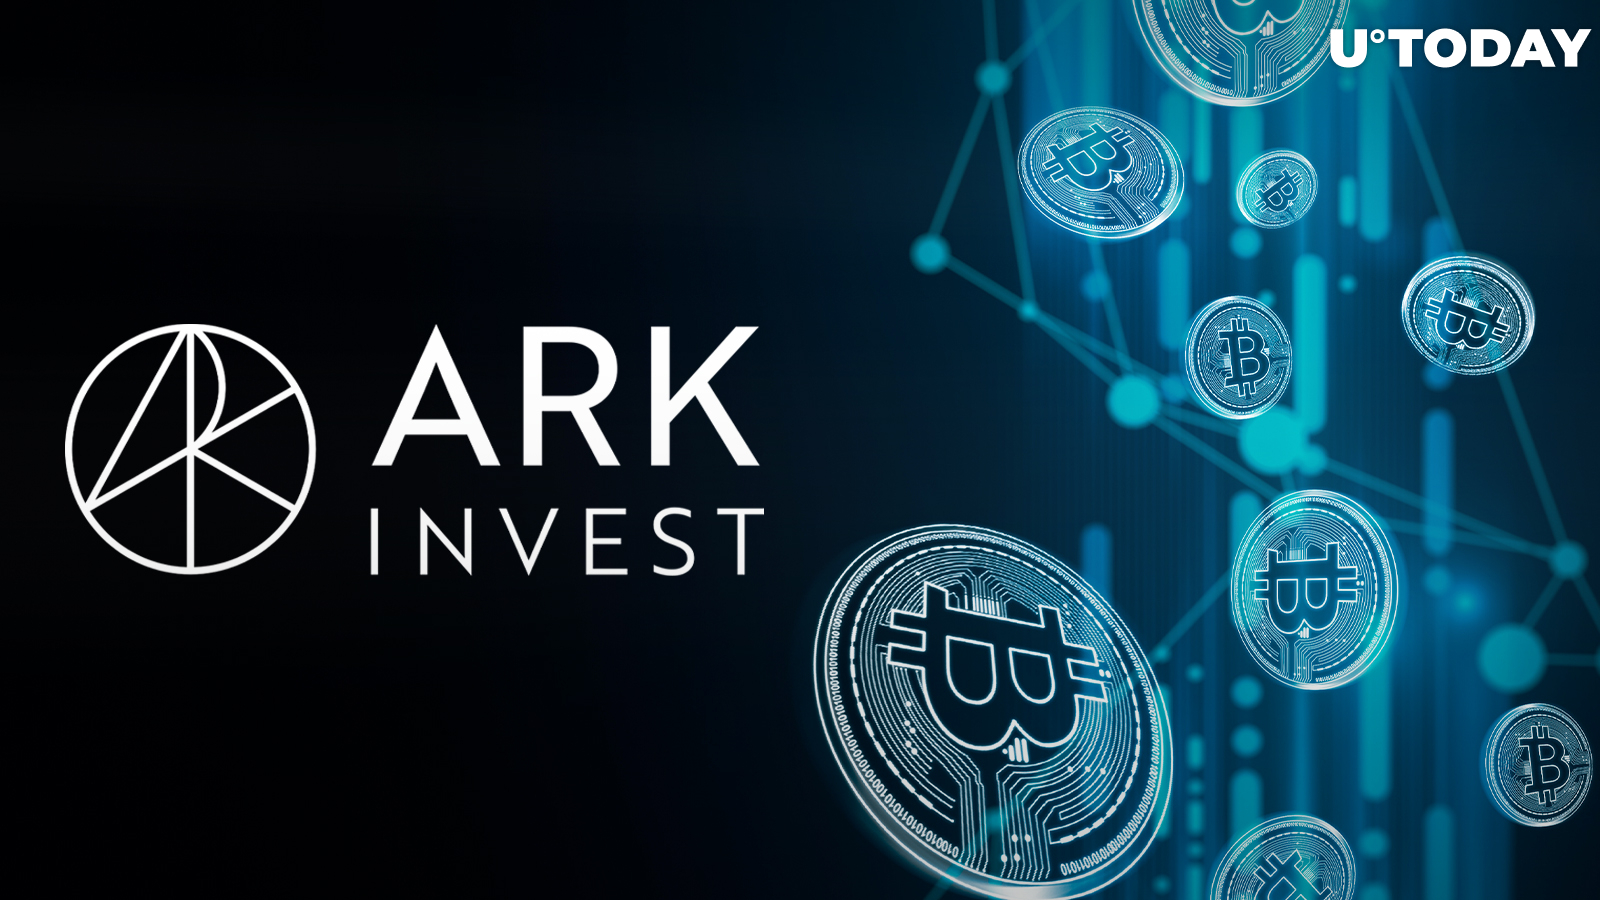 Bitcoin (BTC) ETF by ARK Invest Now Possible After This Epic Maneuver